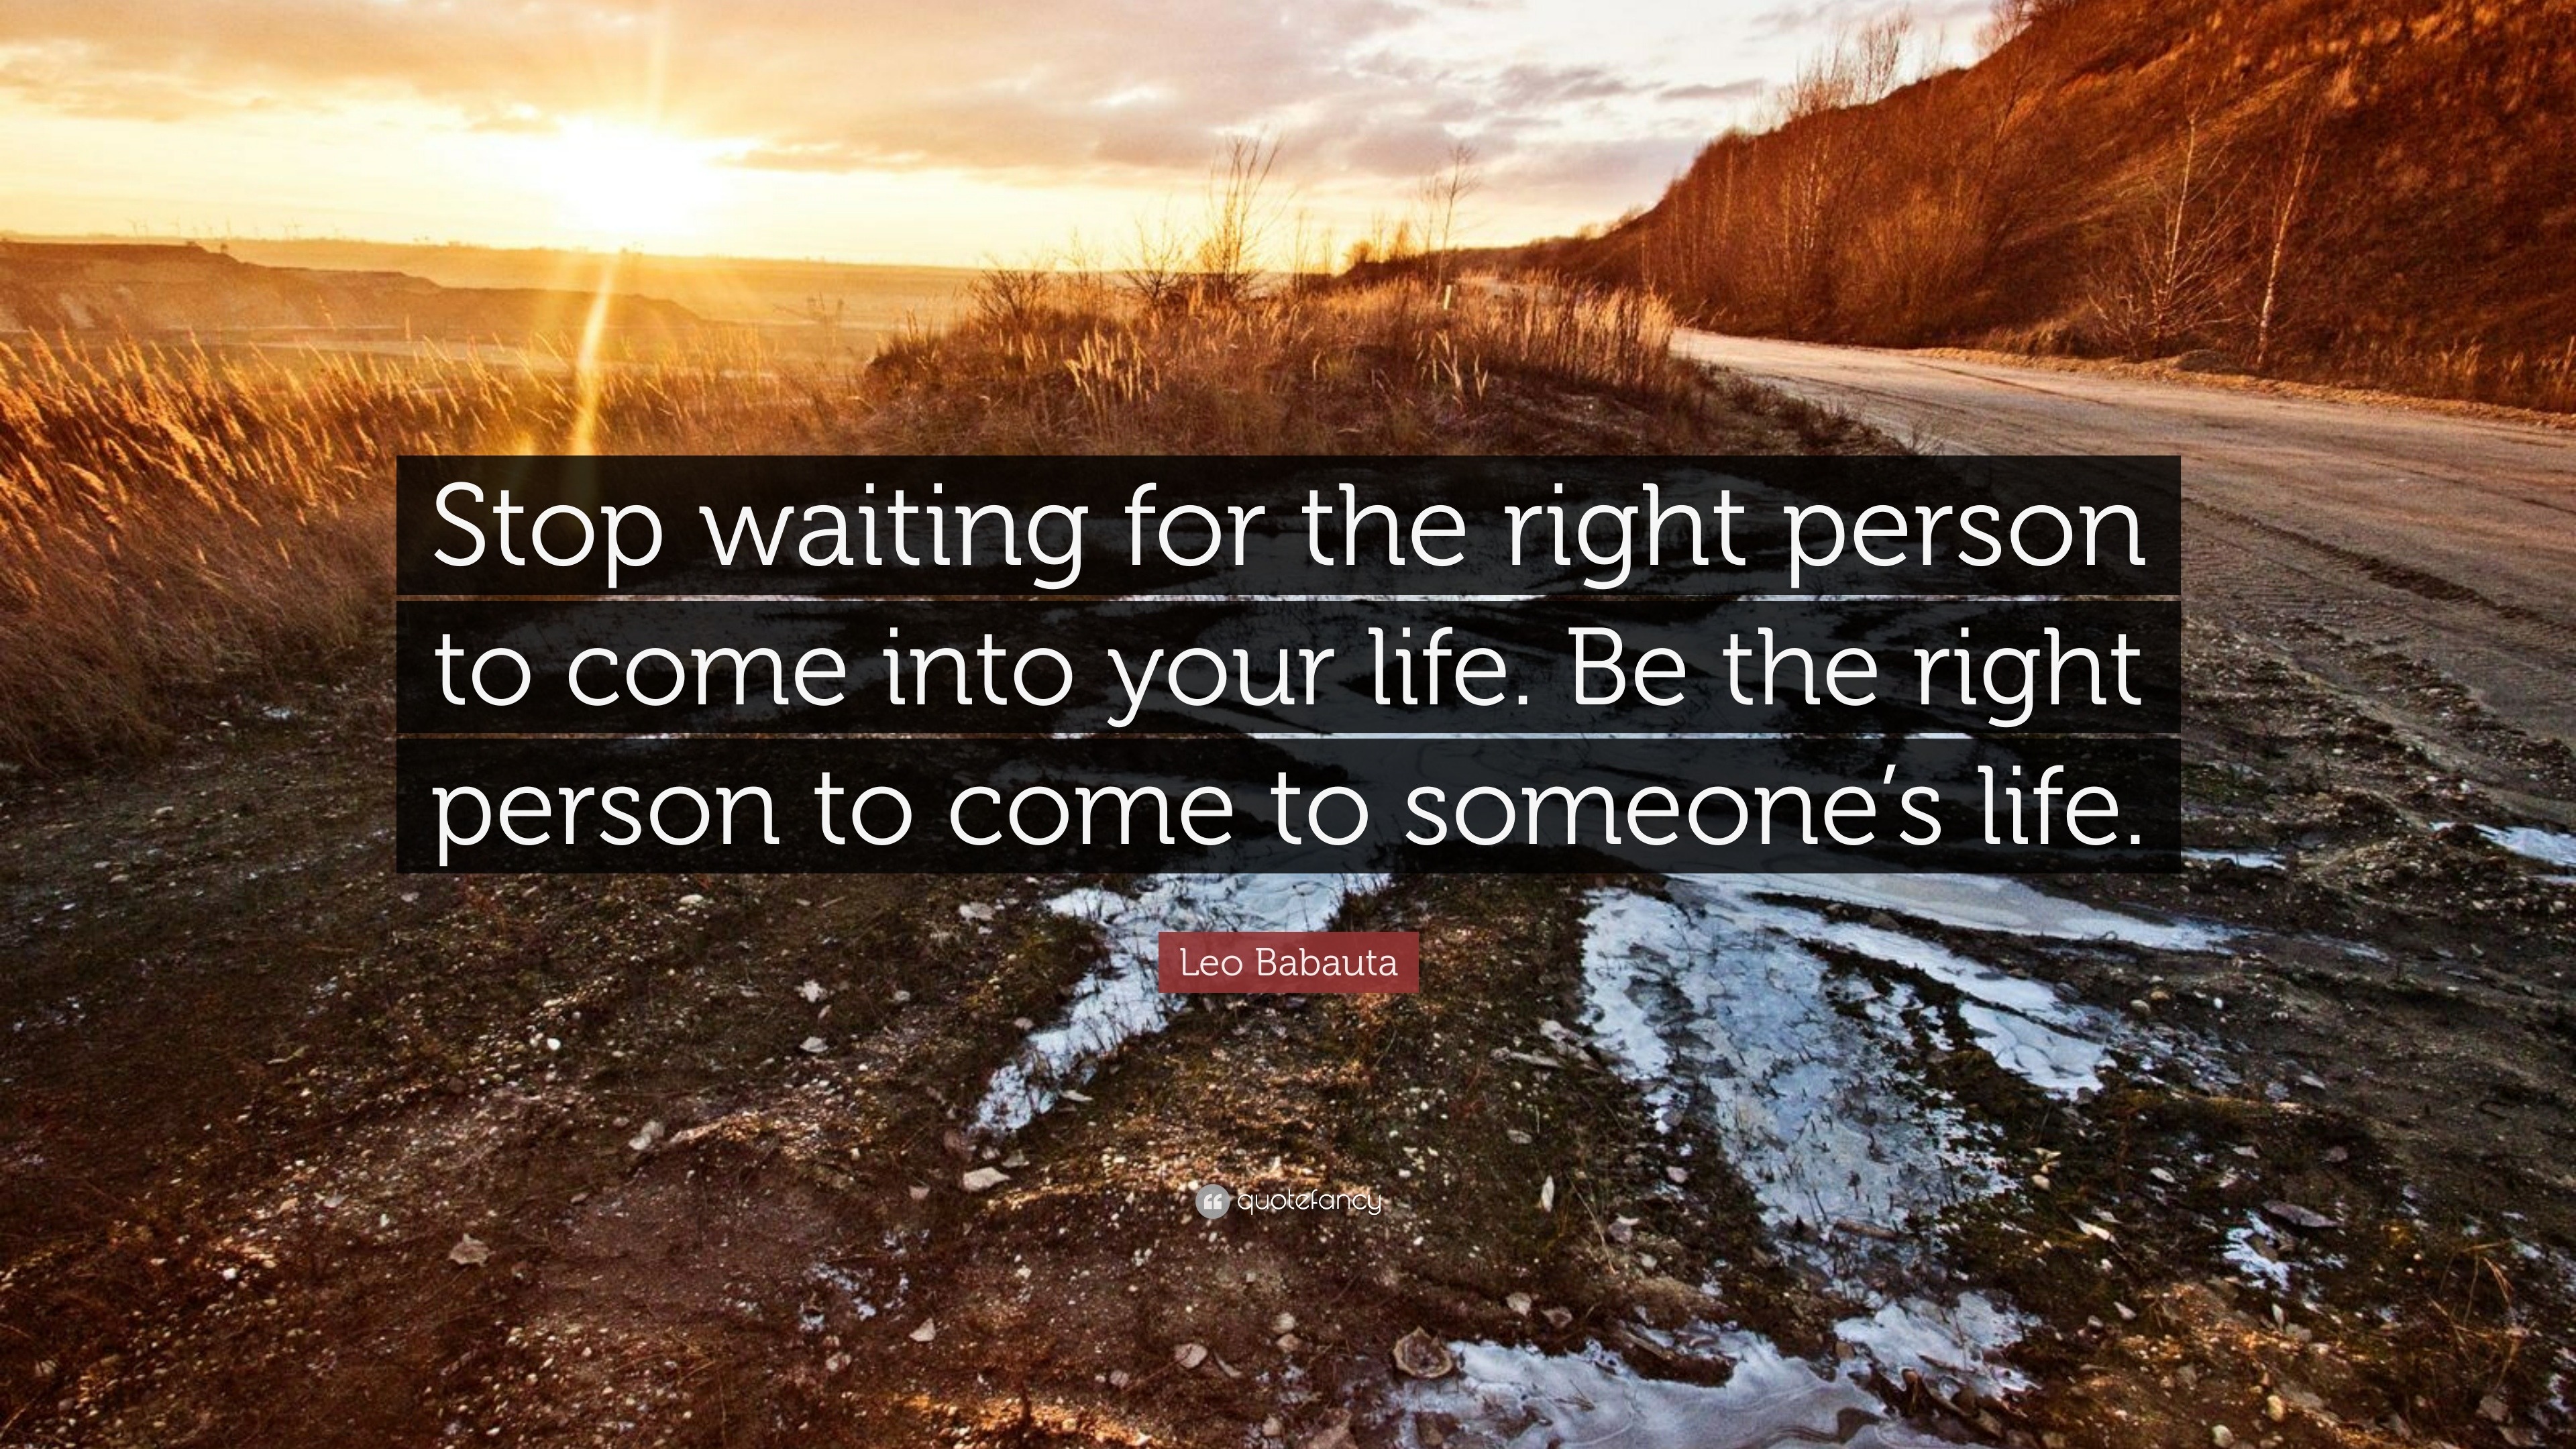 Leo Babauta Quote “Stop waiting for the right person to e into your life